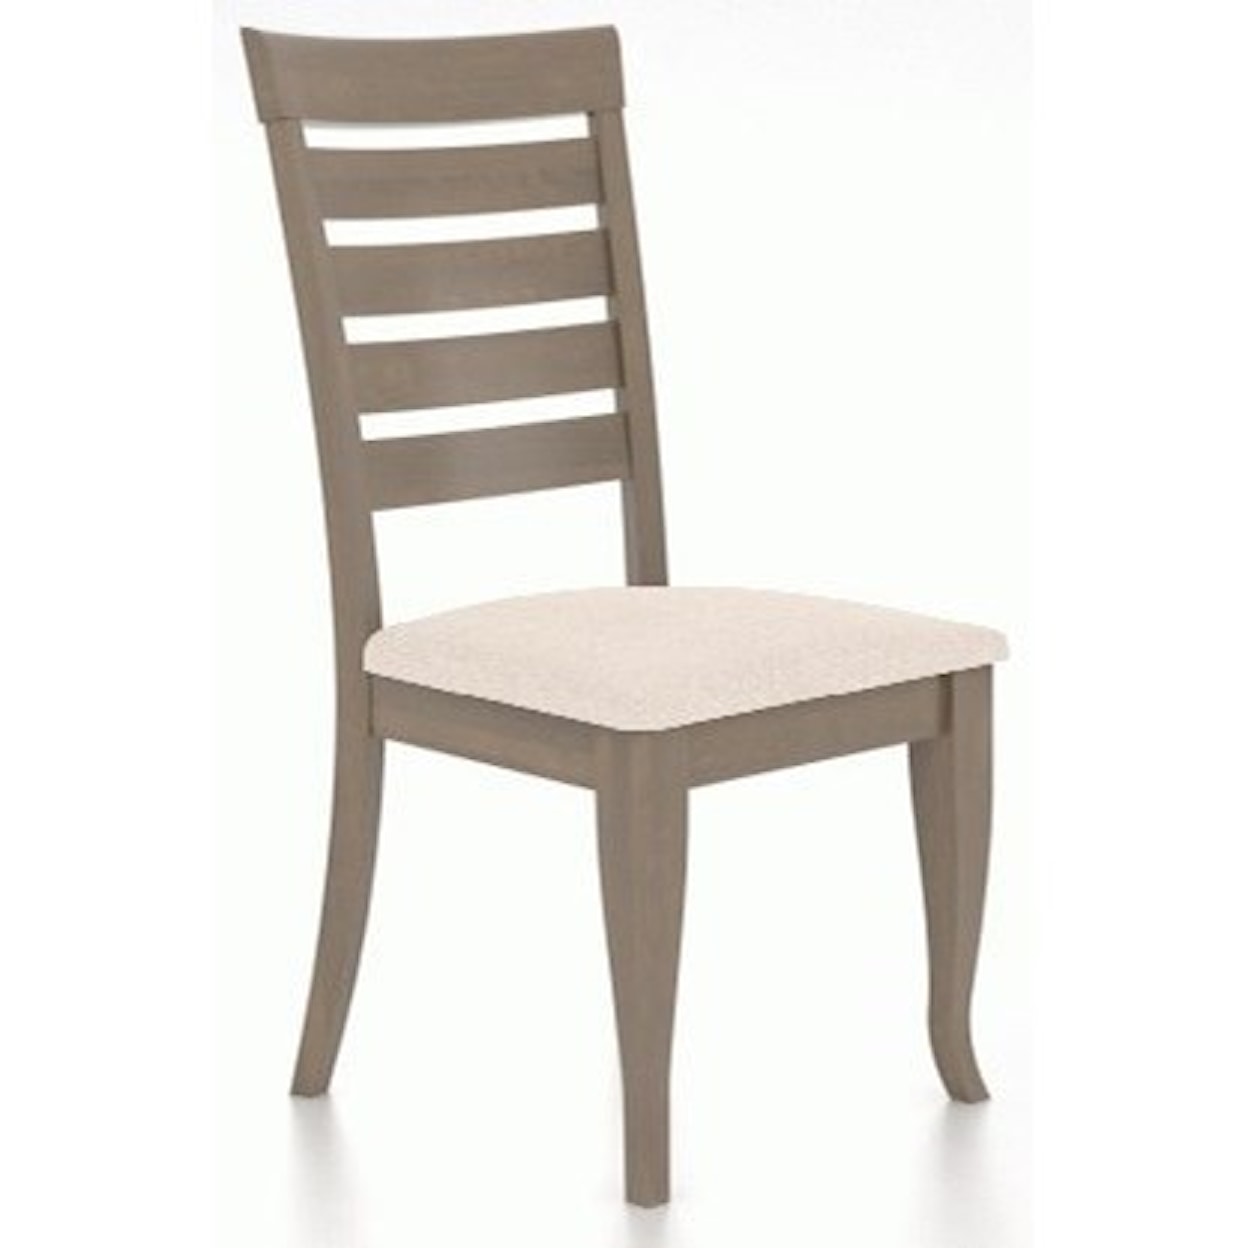 Canadel Gourmet. Customizable Dining Side Chair